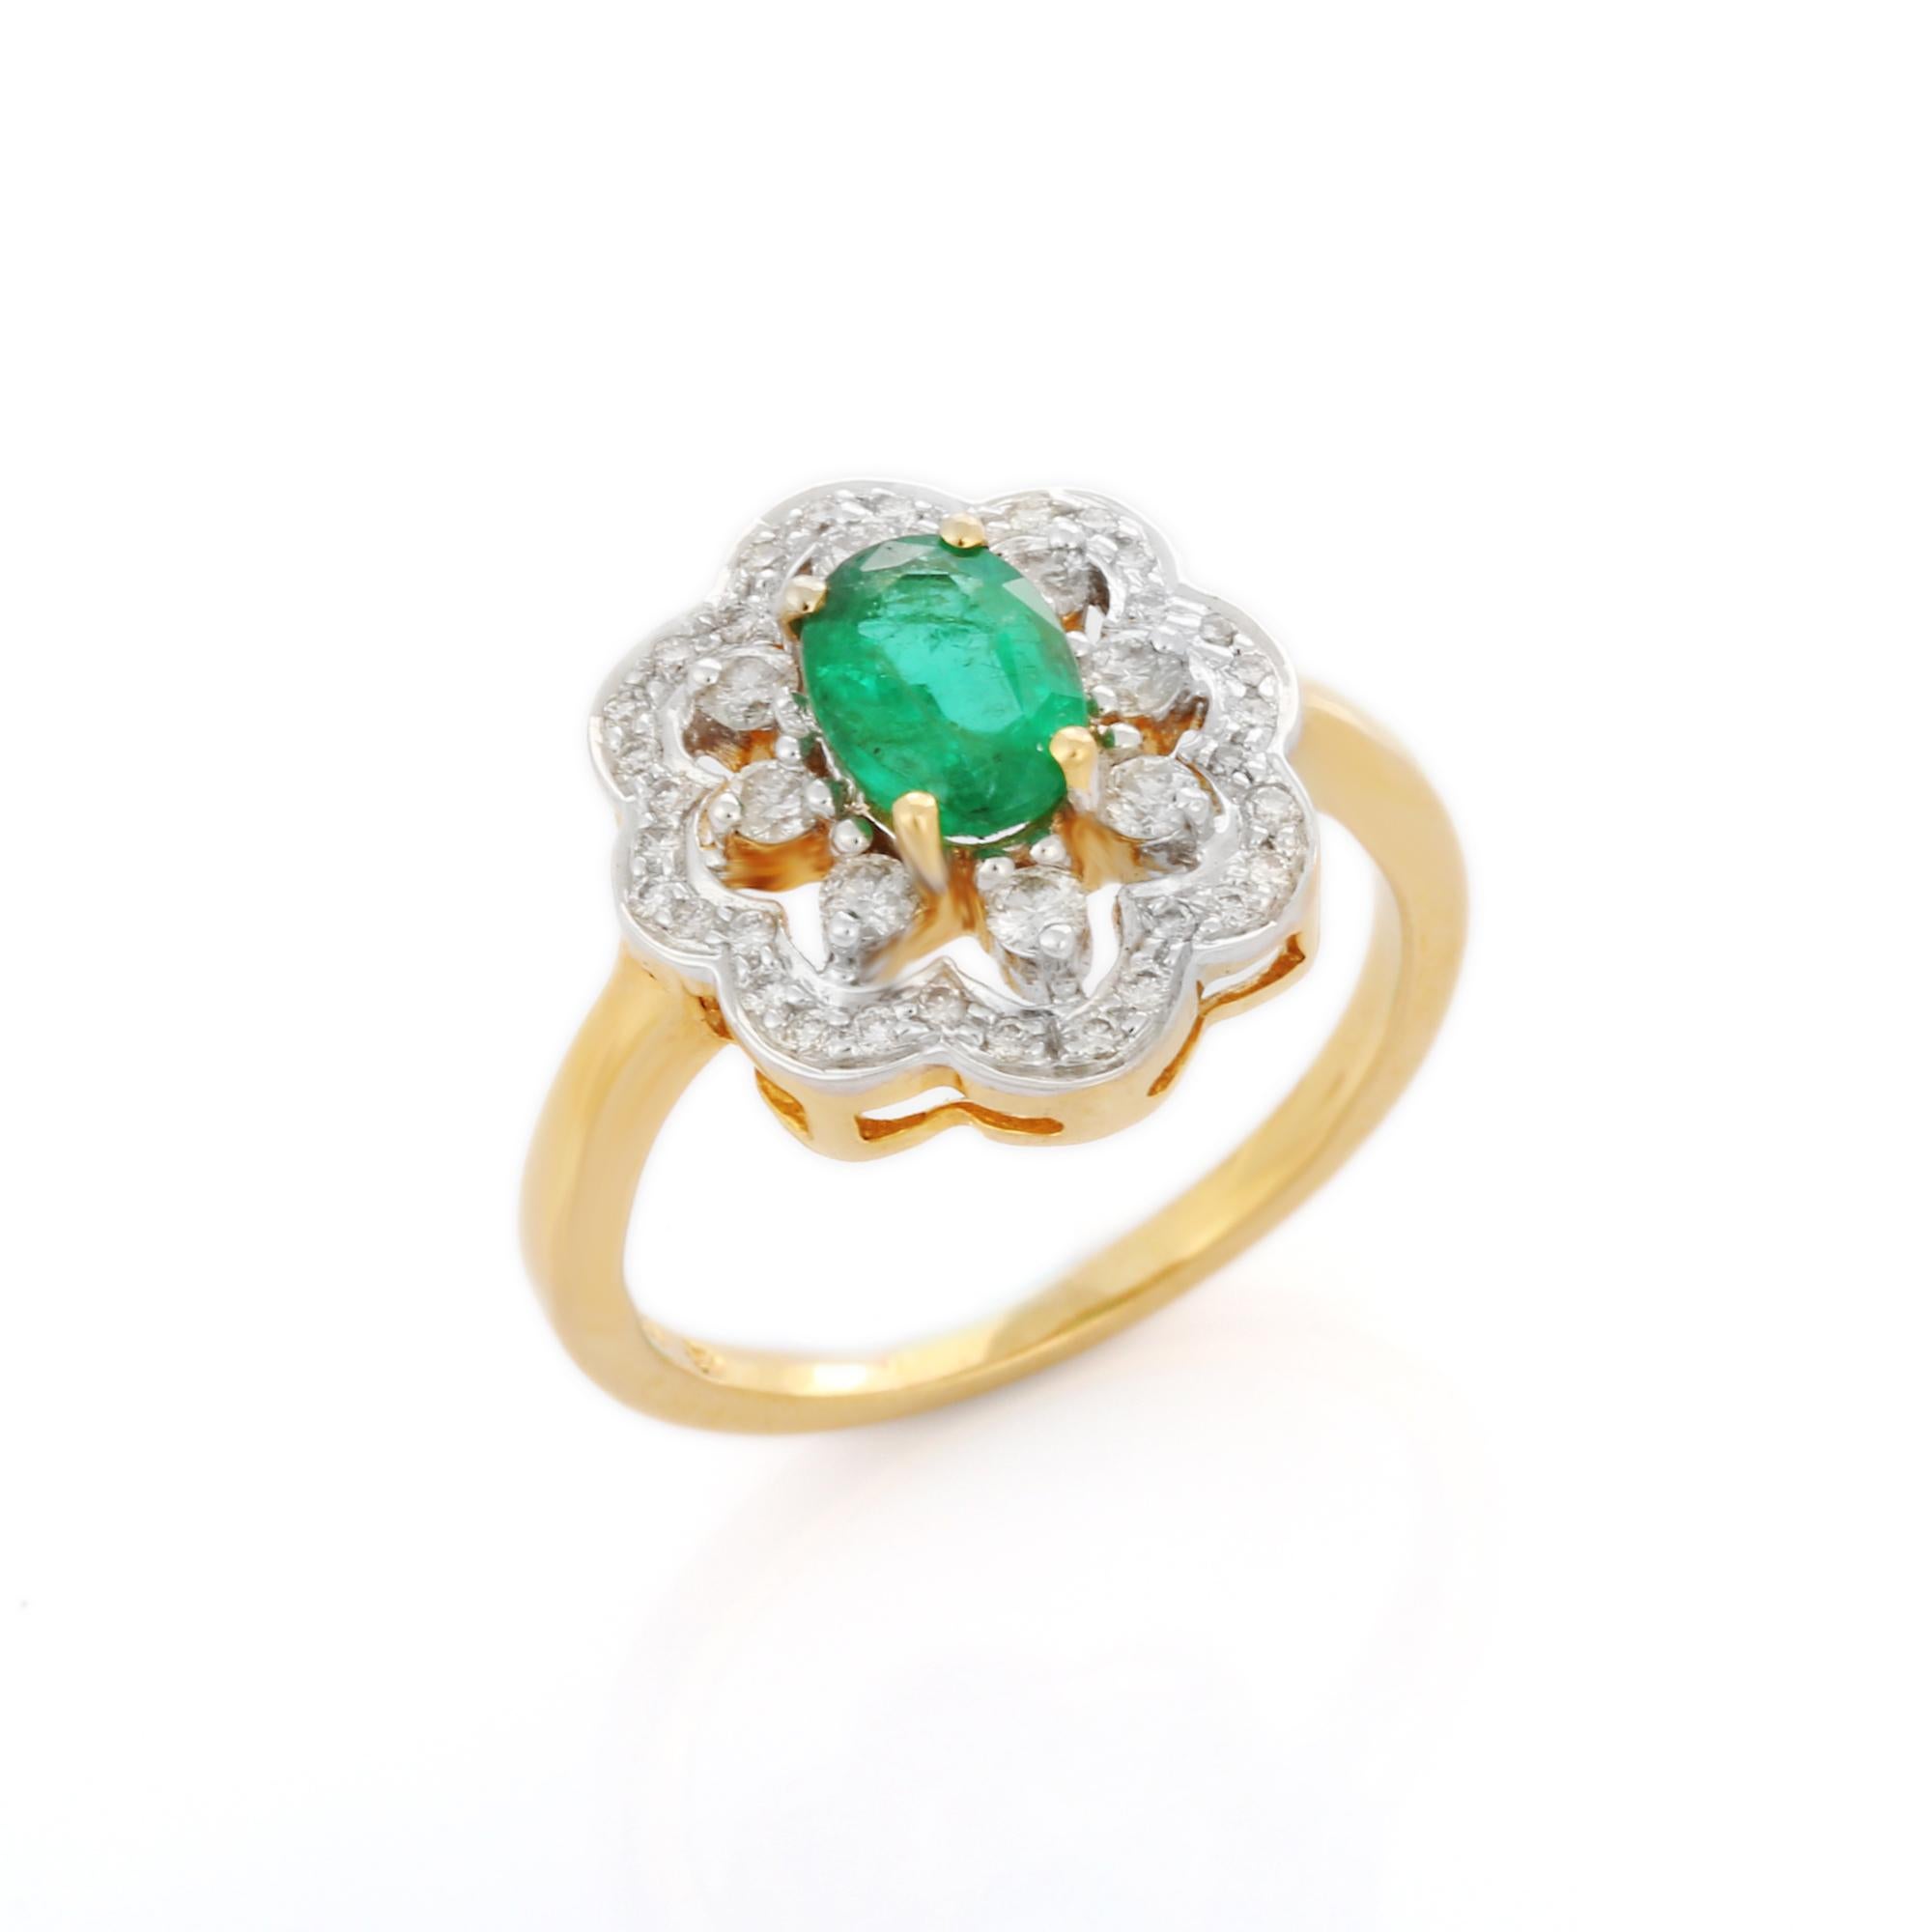 For Sale:  Big Floral Oval Cut Emerald and Diamond Cocktail Ring in 18K Yellow Gold 2